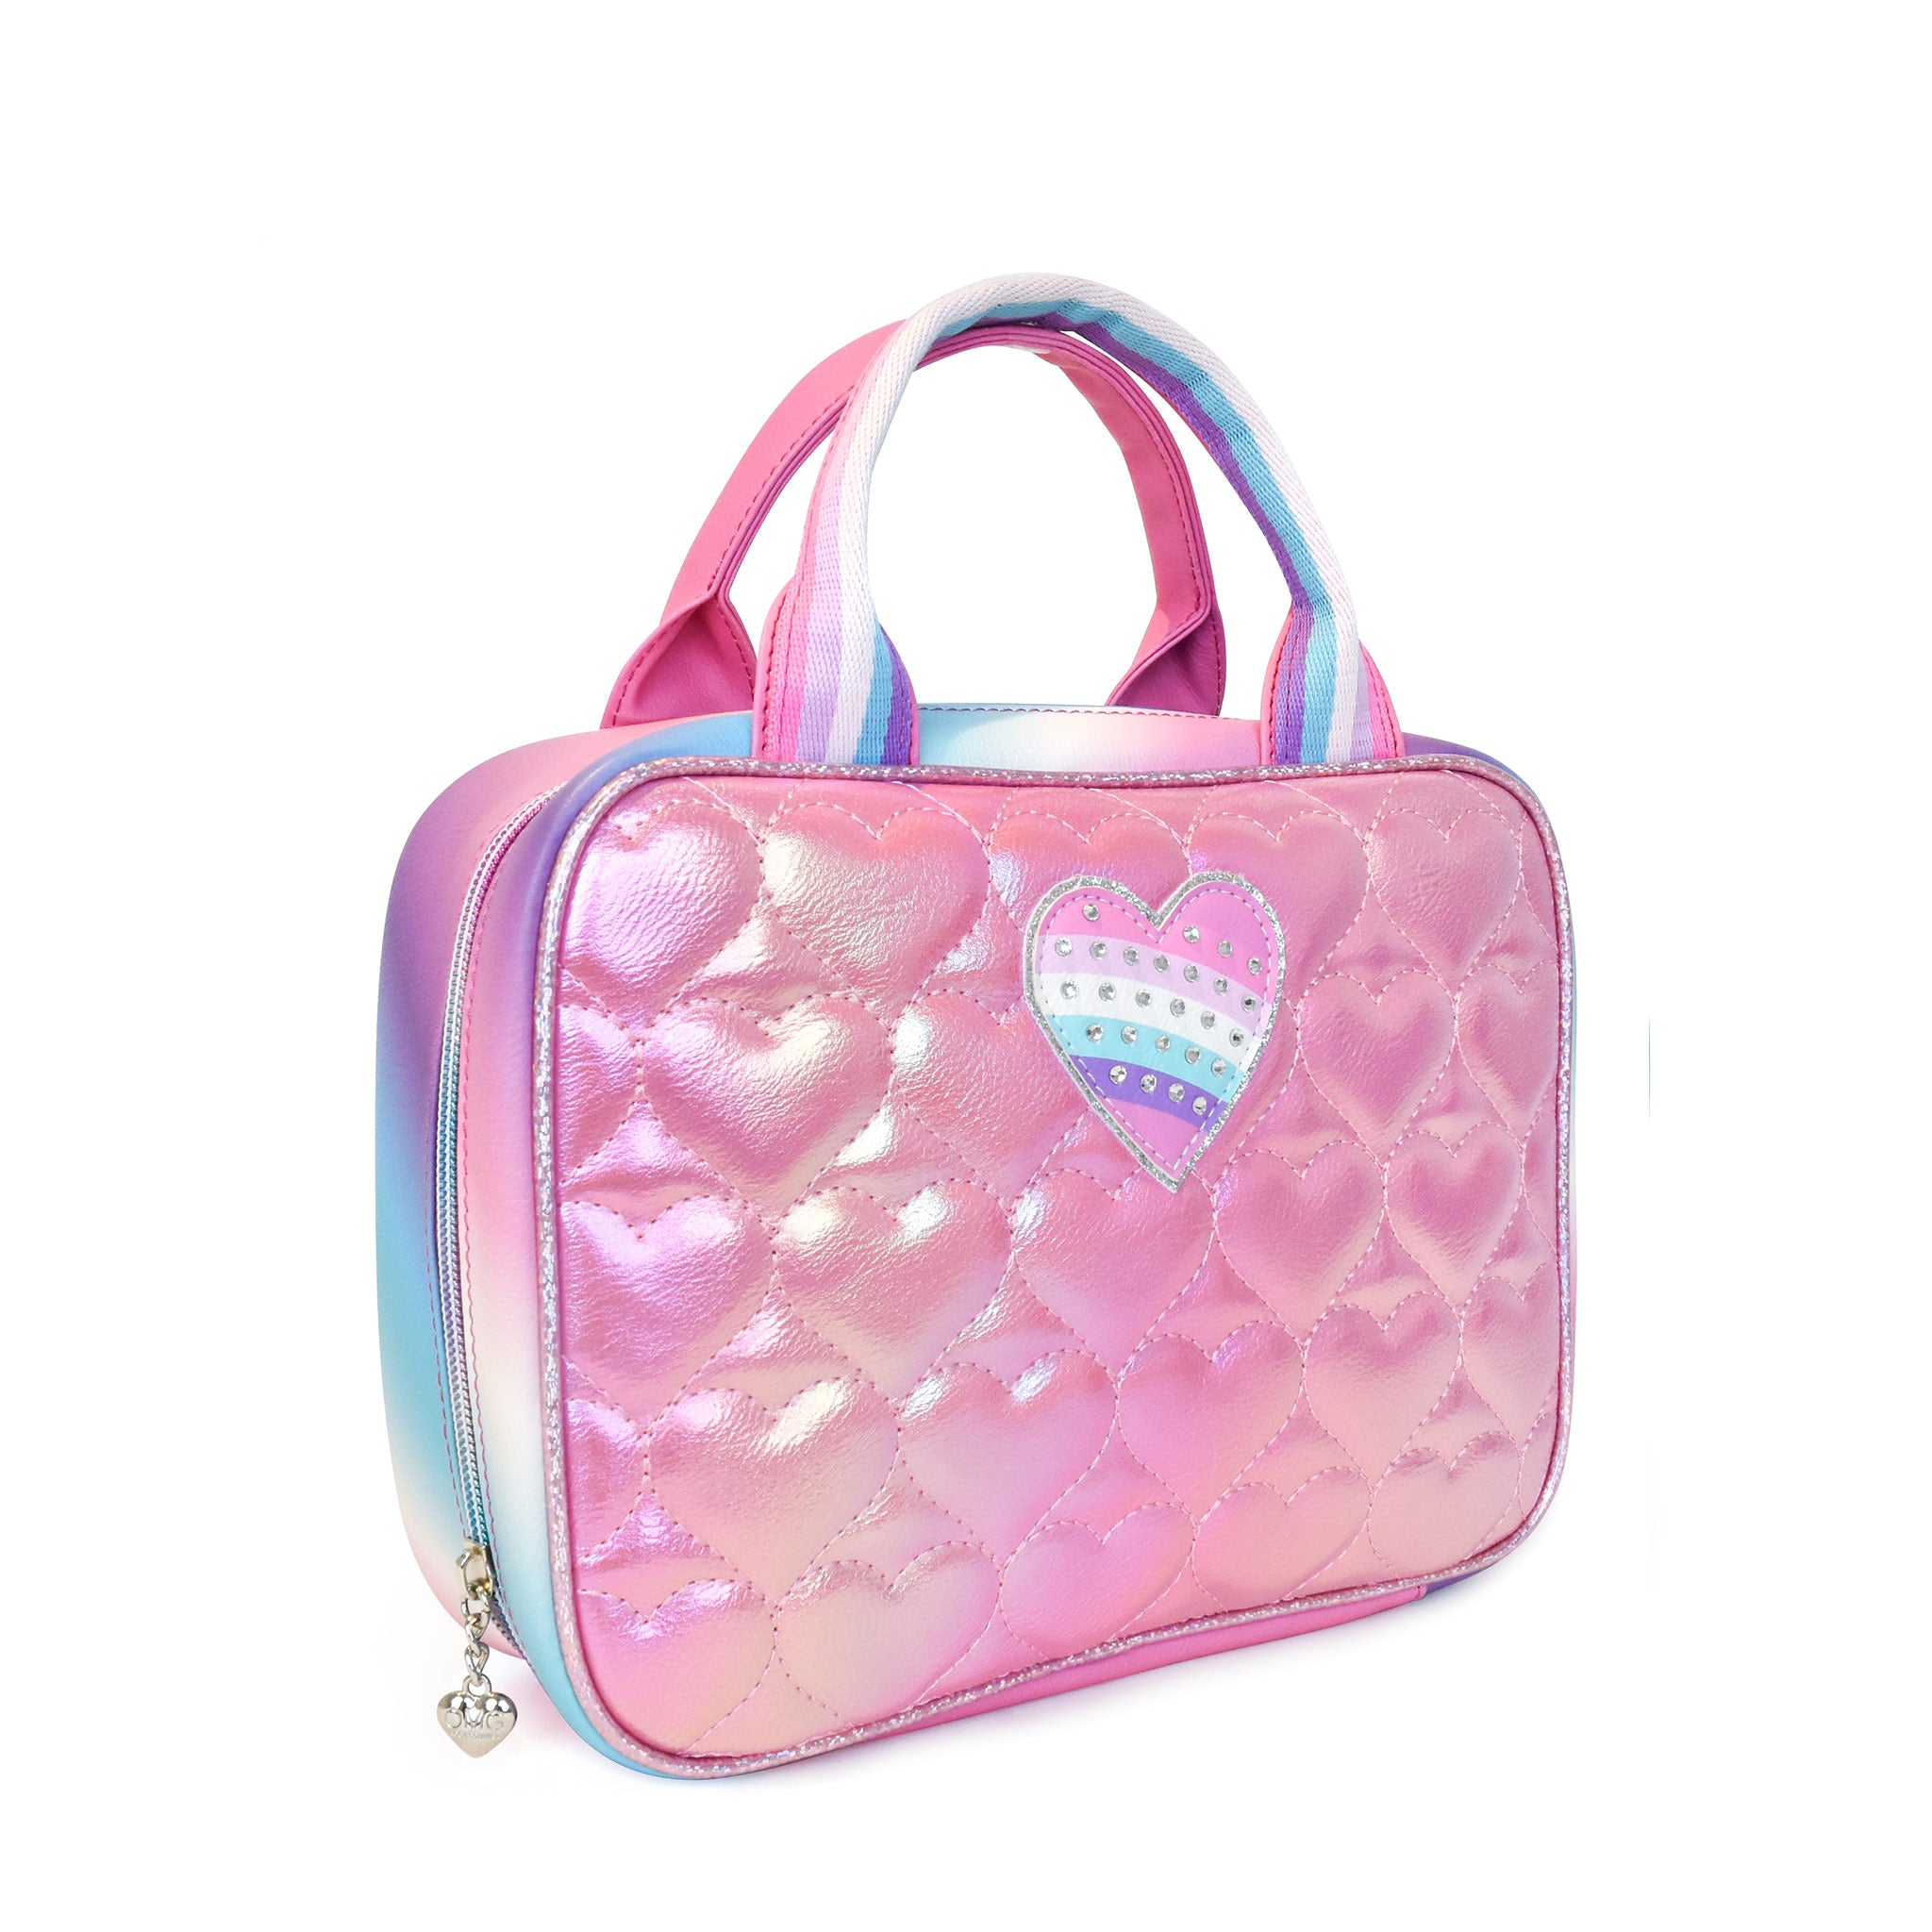 Side view of a pink metallic rectangular lunch bag with heart quilting and a rhinestone heart applique